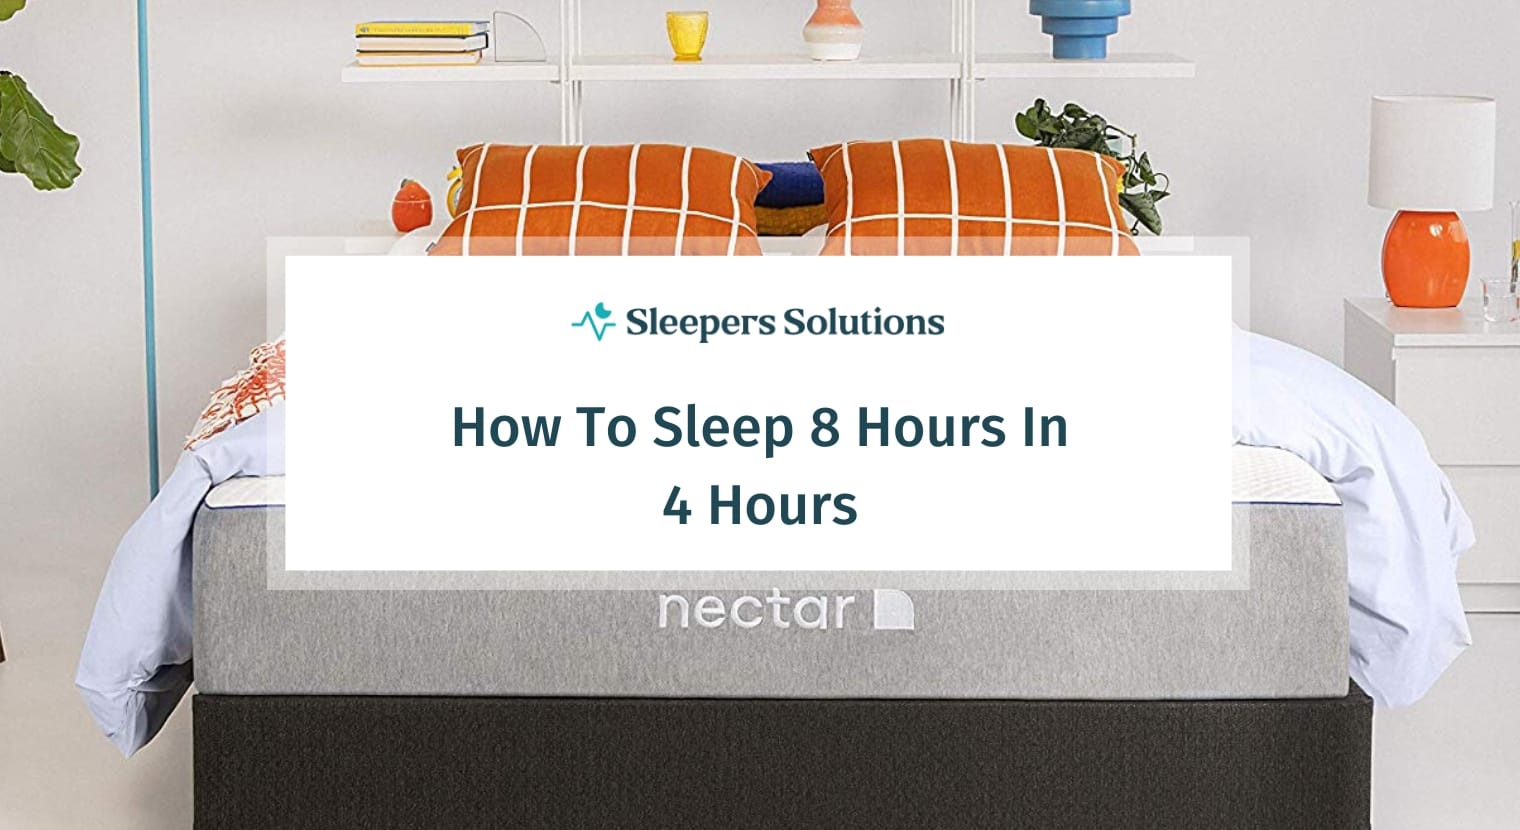 How to Sleep 8 Hours in 4 Hours